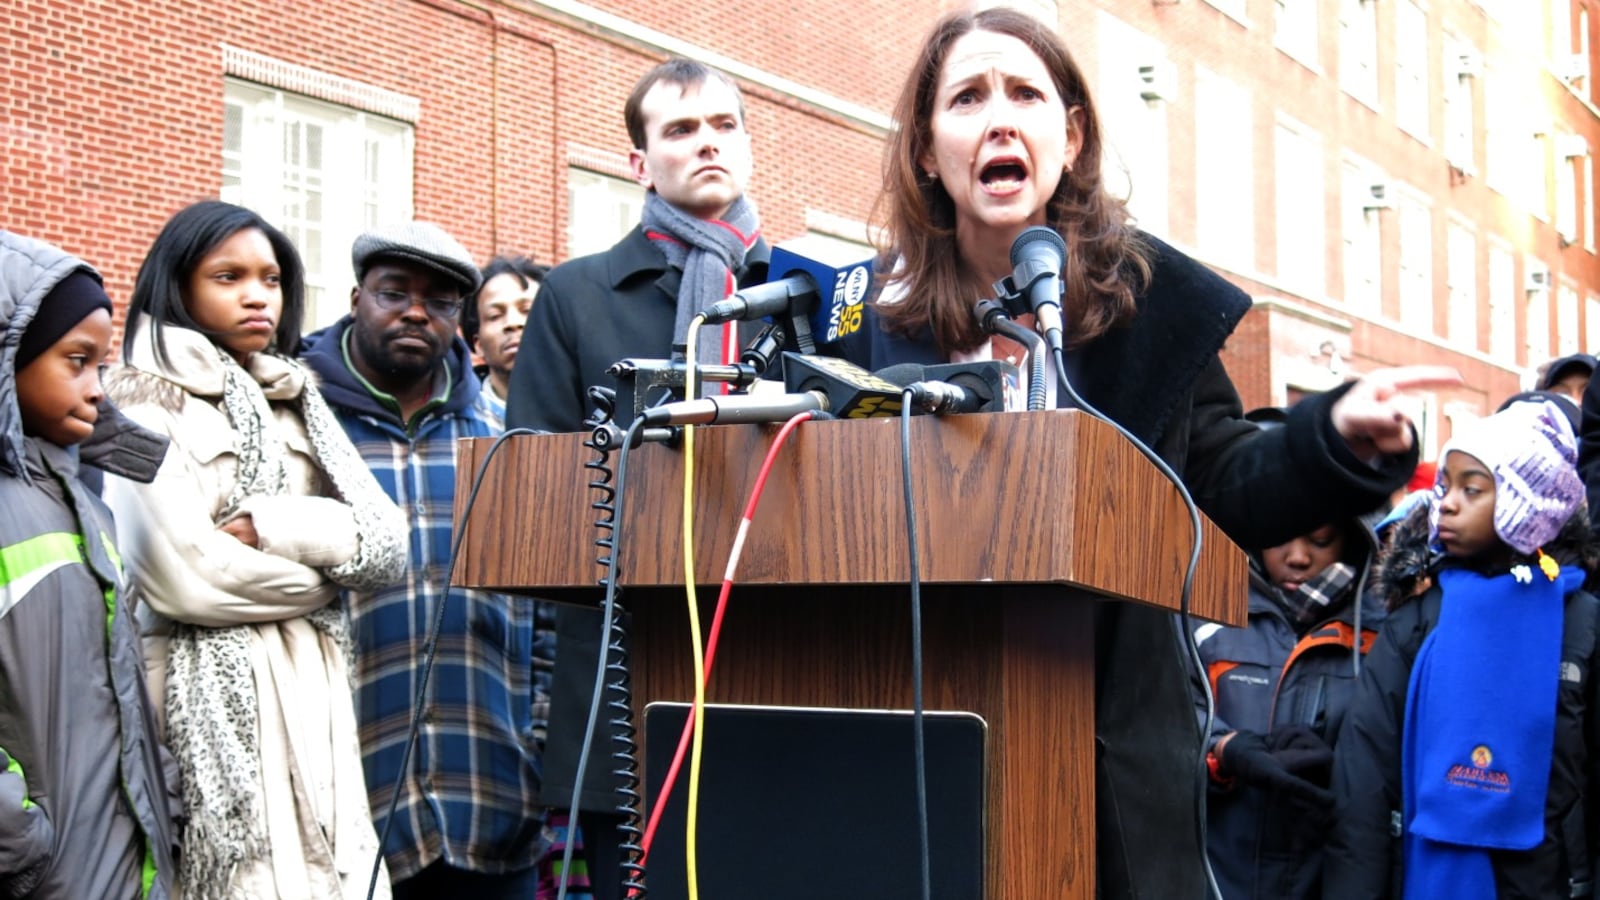 demy CEO Eva Moskowitz railed against the city's decision to cancel three previously approved co-locations involving Success schools during a press conference Thursday outside of Success Academy Harlem 4.